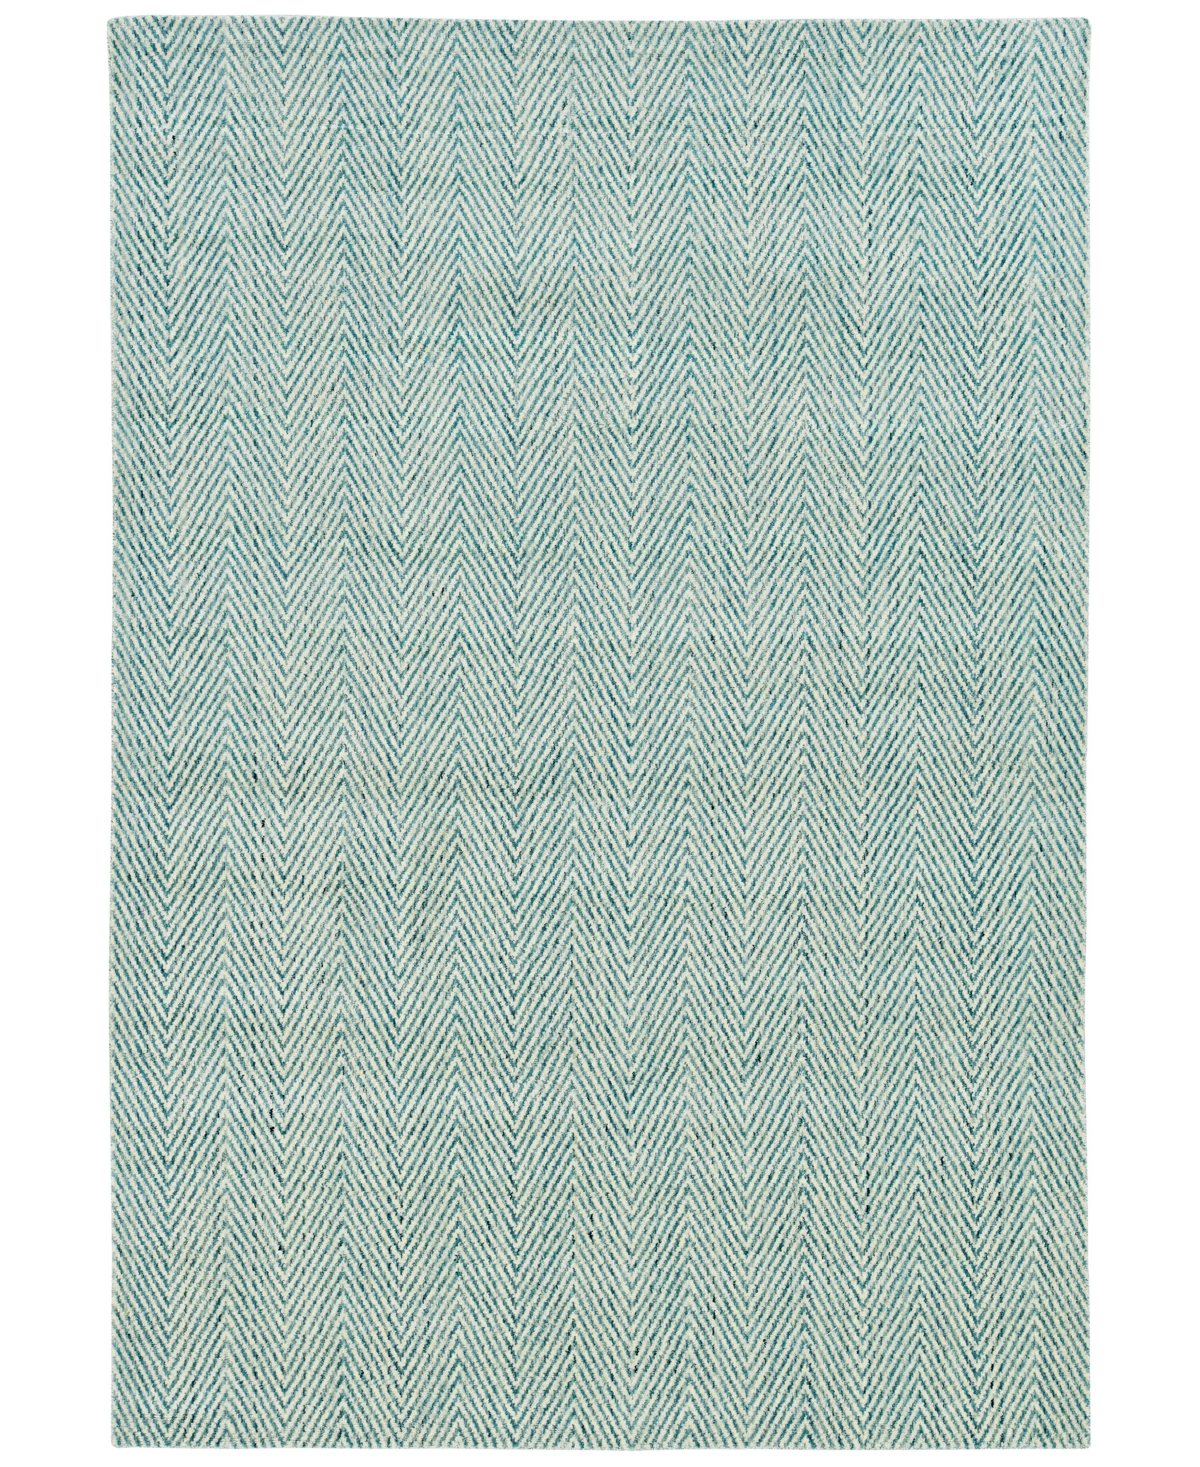 Km Home Miro 100 6' X 9' Area Rug In Mint